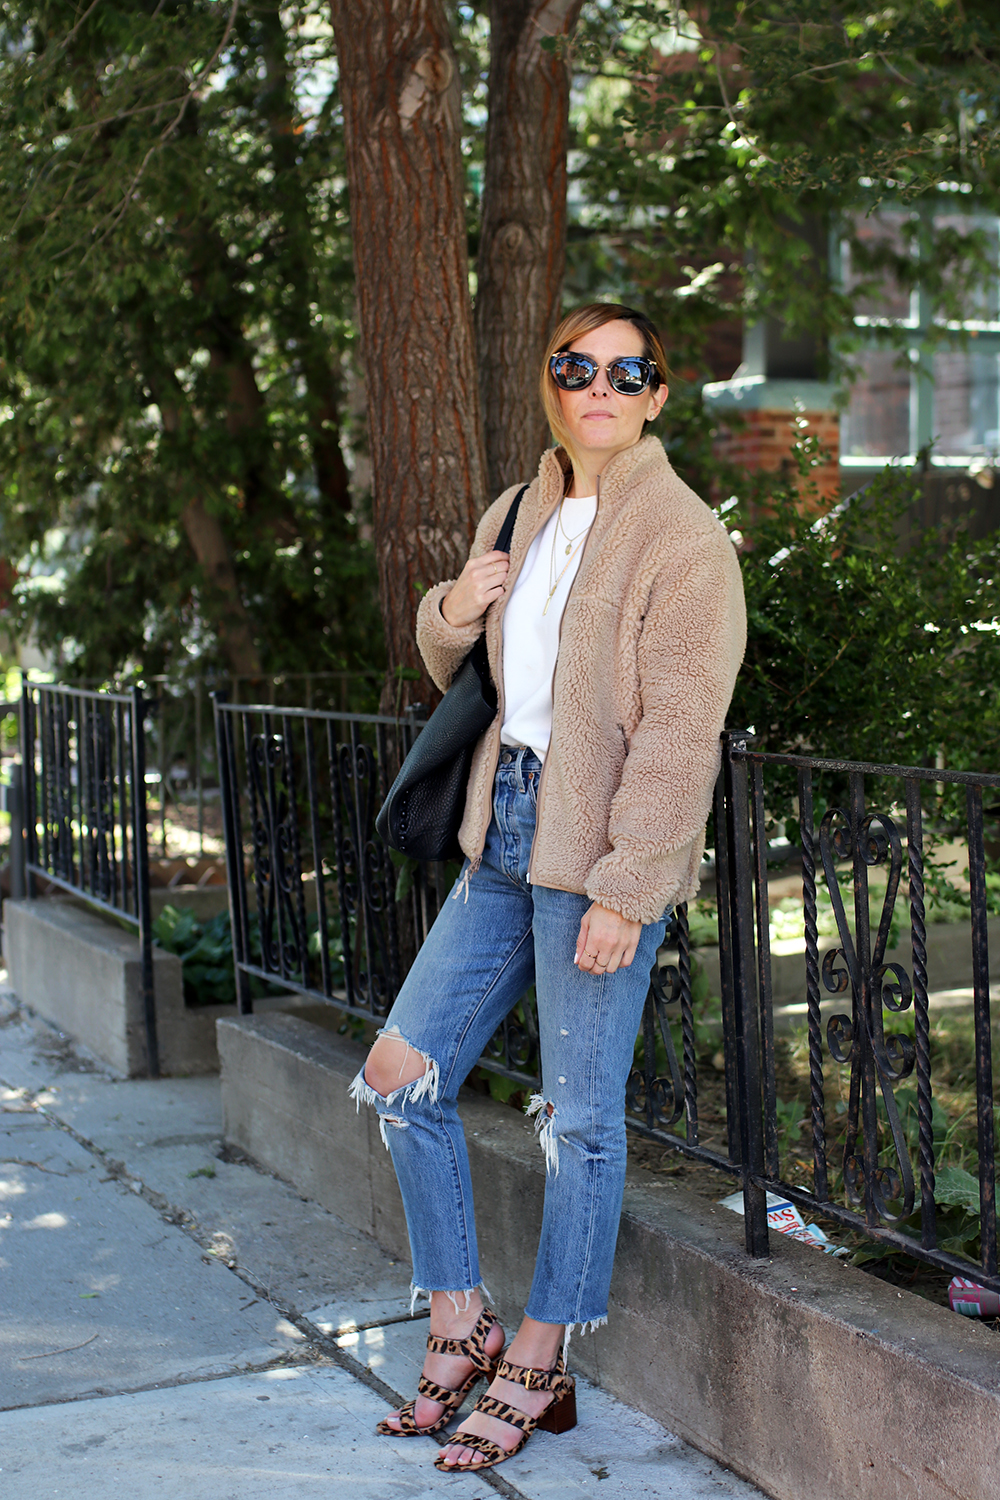 Outfits File: The Teddy Bear Jacket for Fall - gaby burger